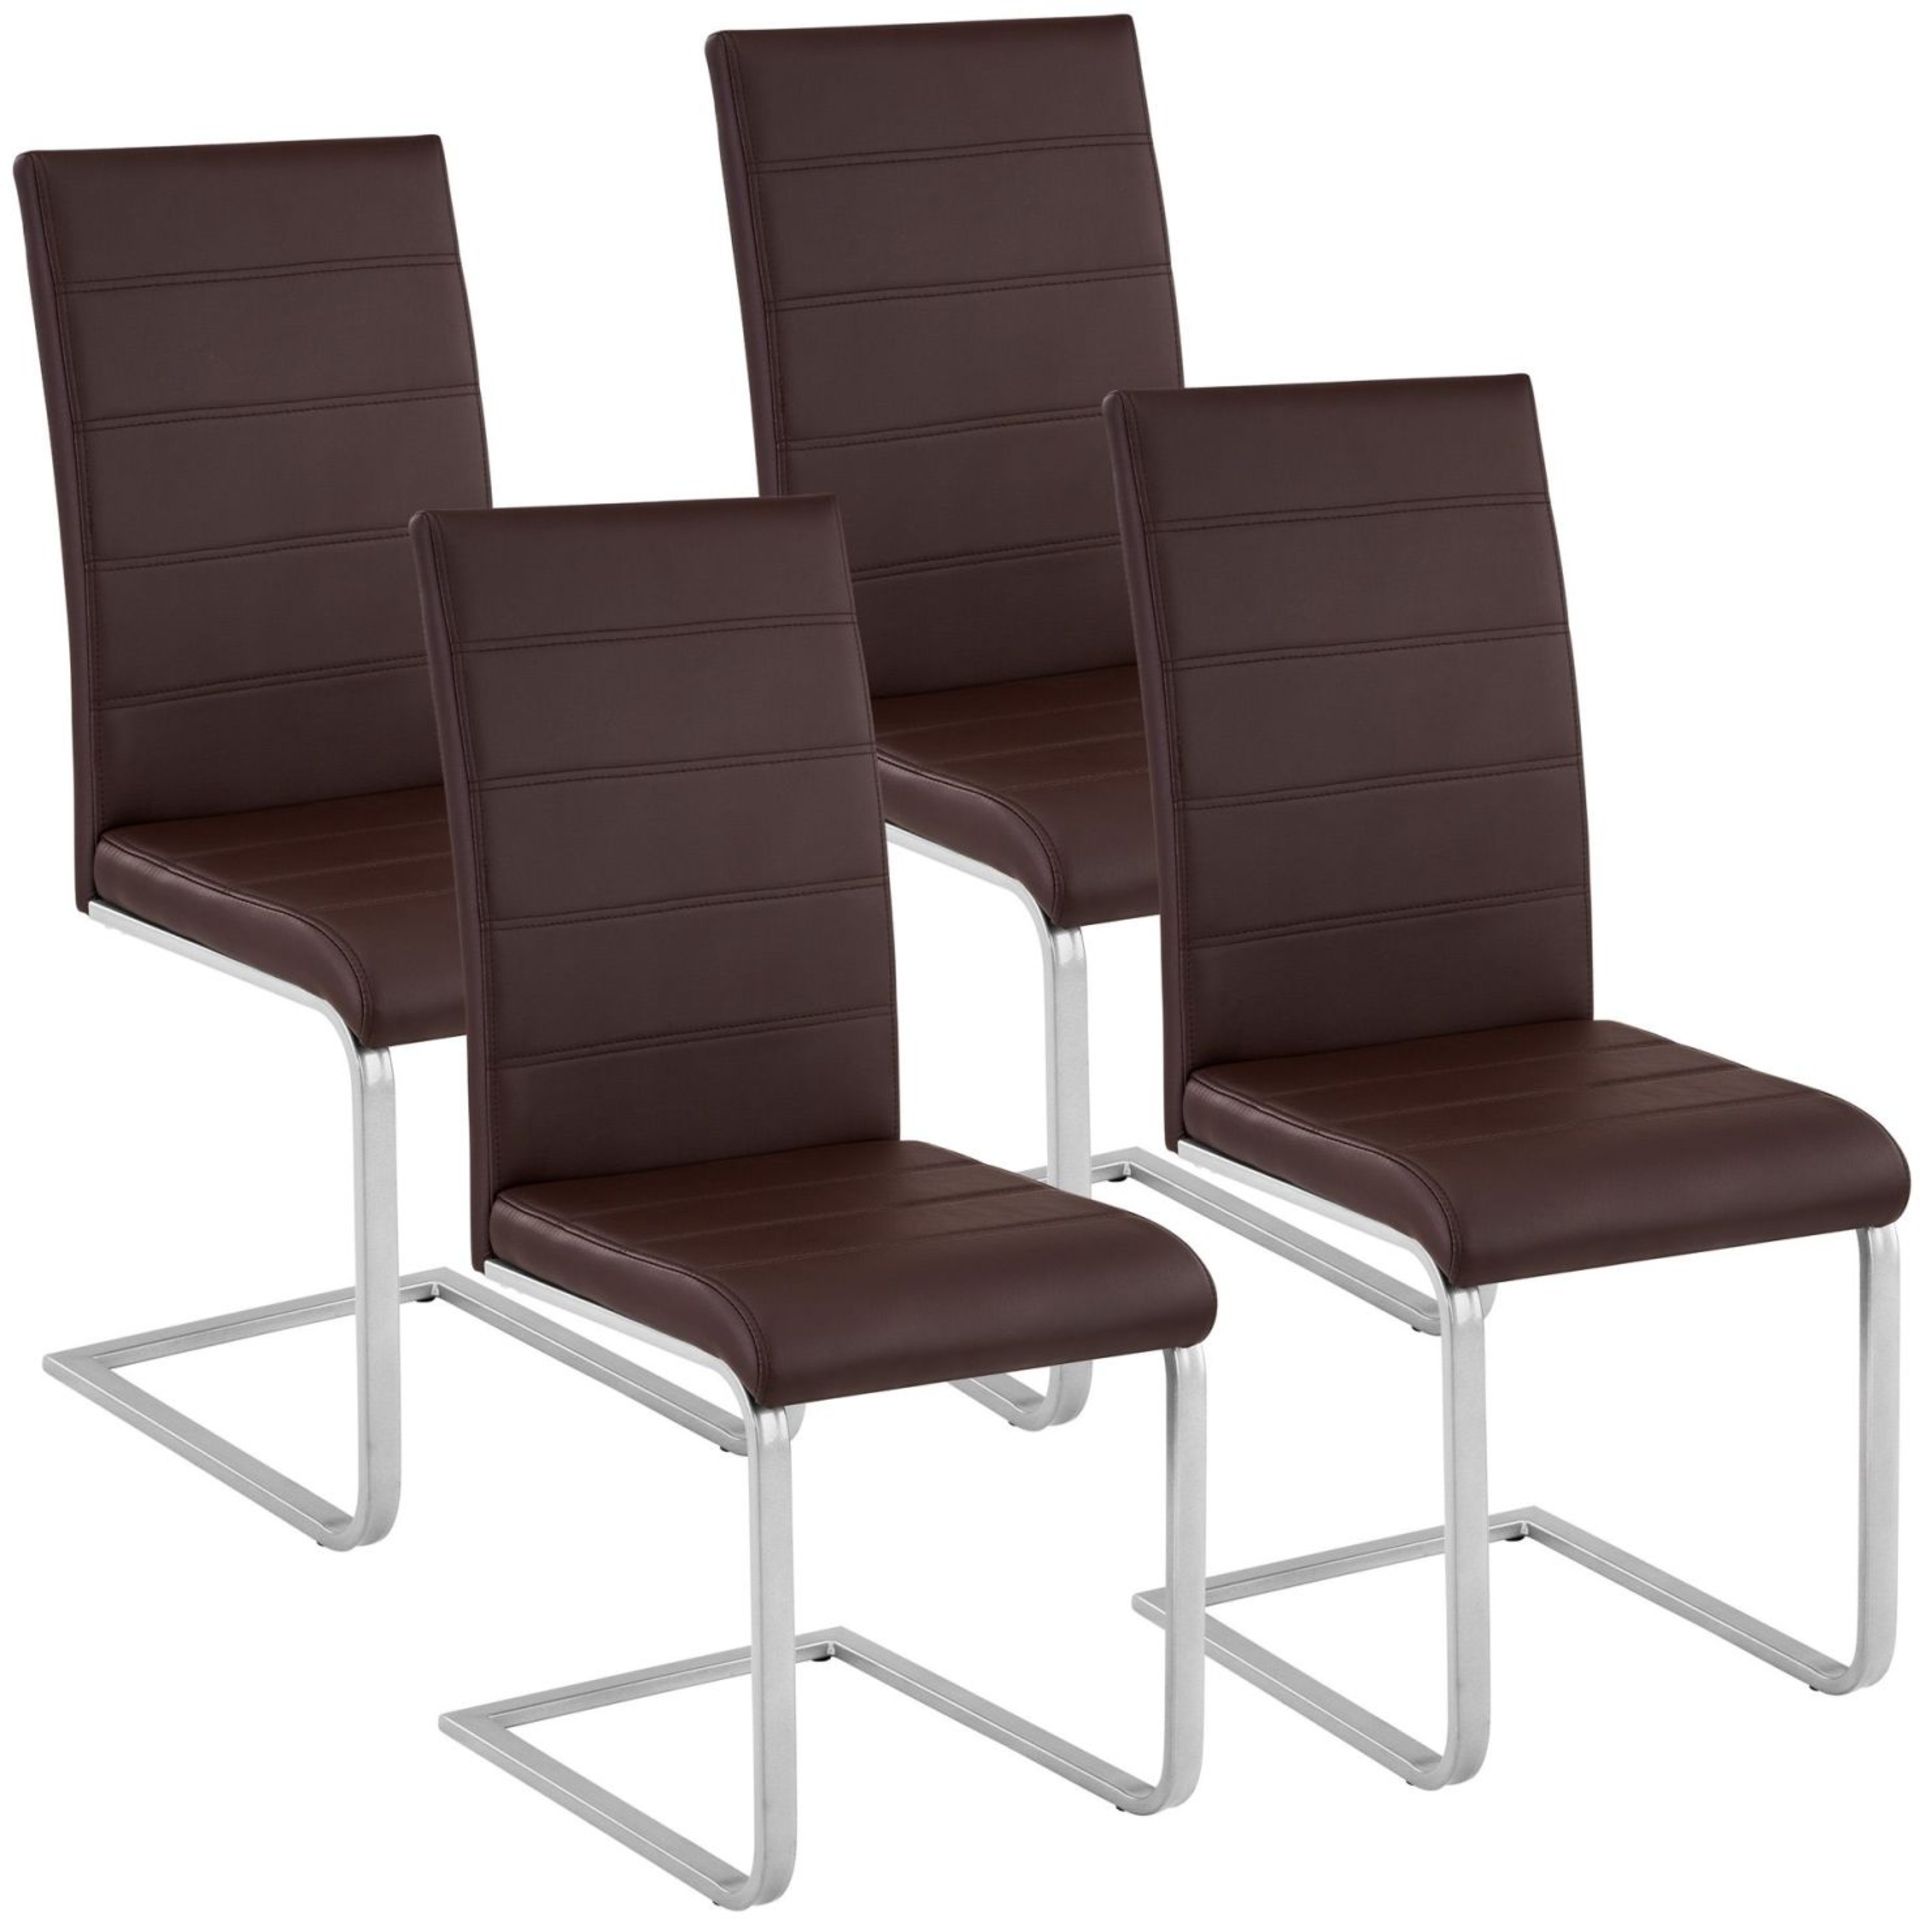 Tectake - 4 Dining Chairs Rocking Chairs Brown - Boxed. RRP £197.99 - Image 2 of 2